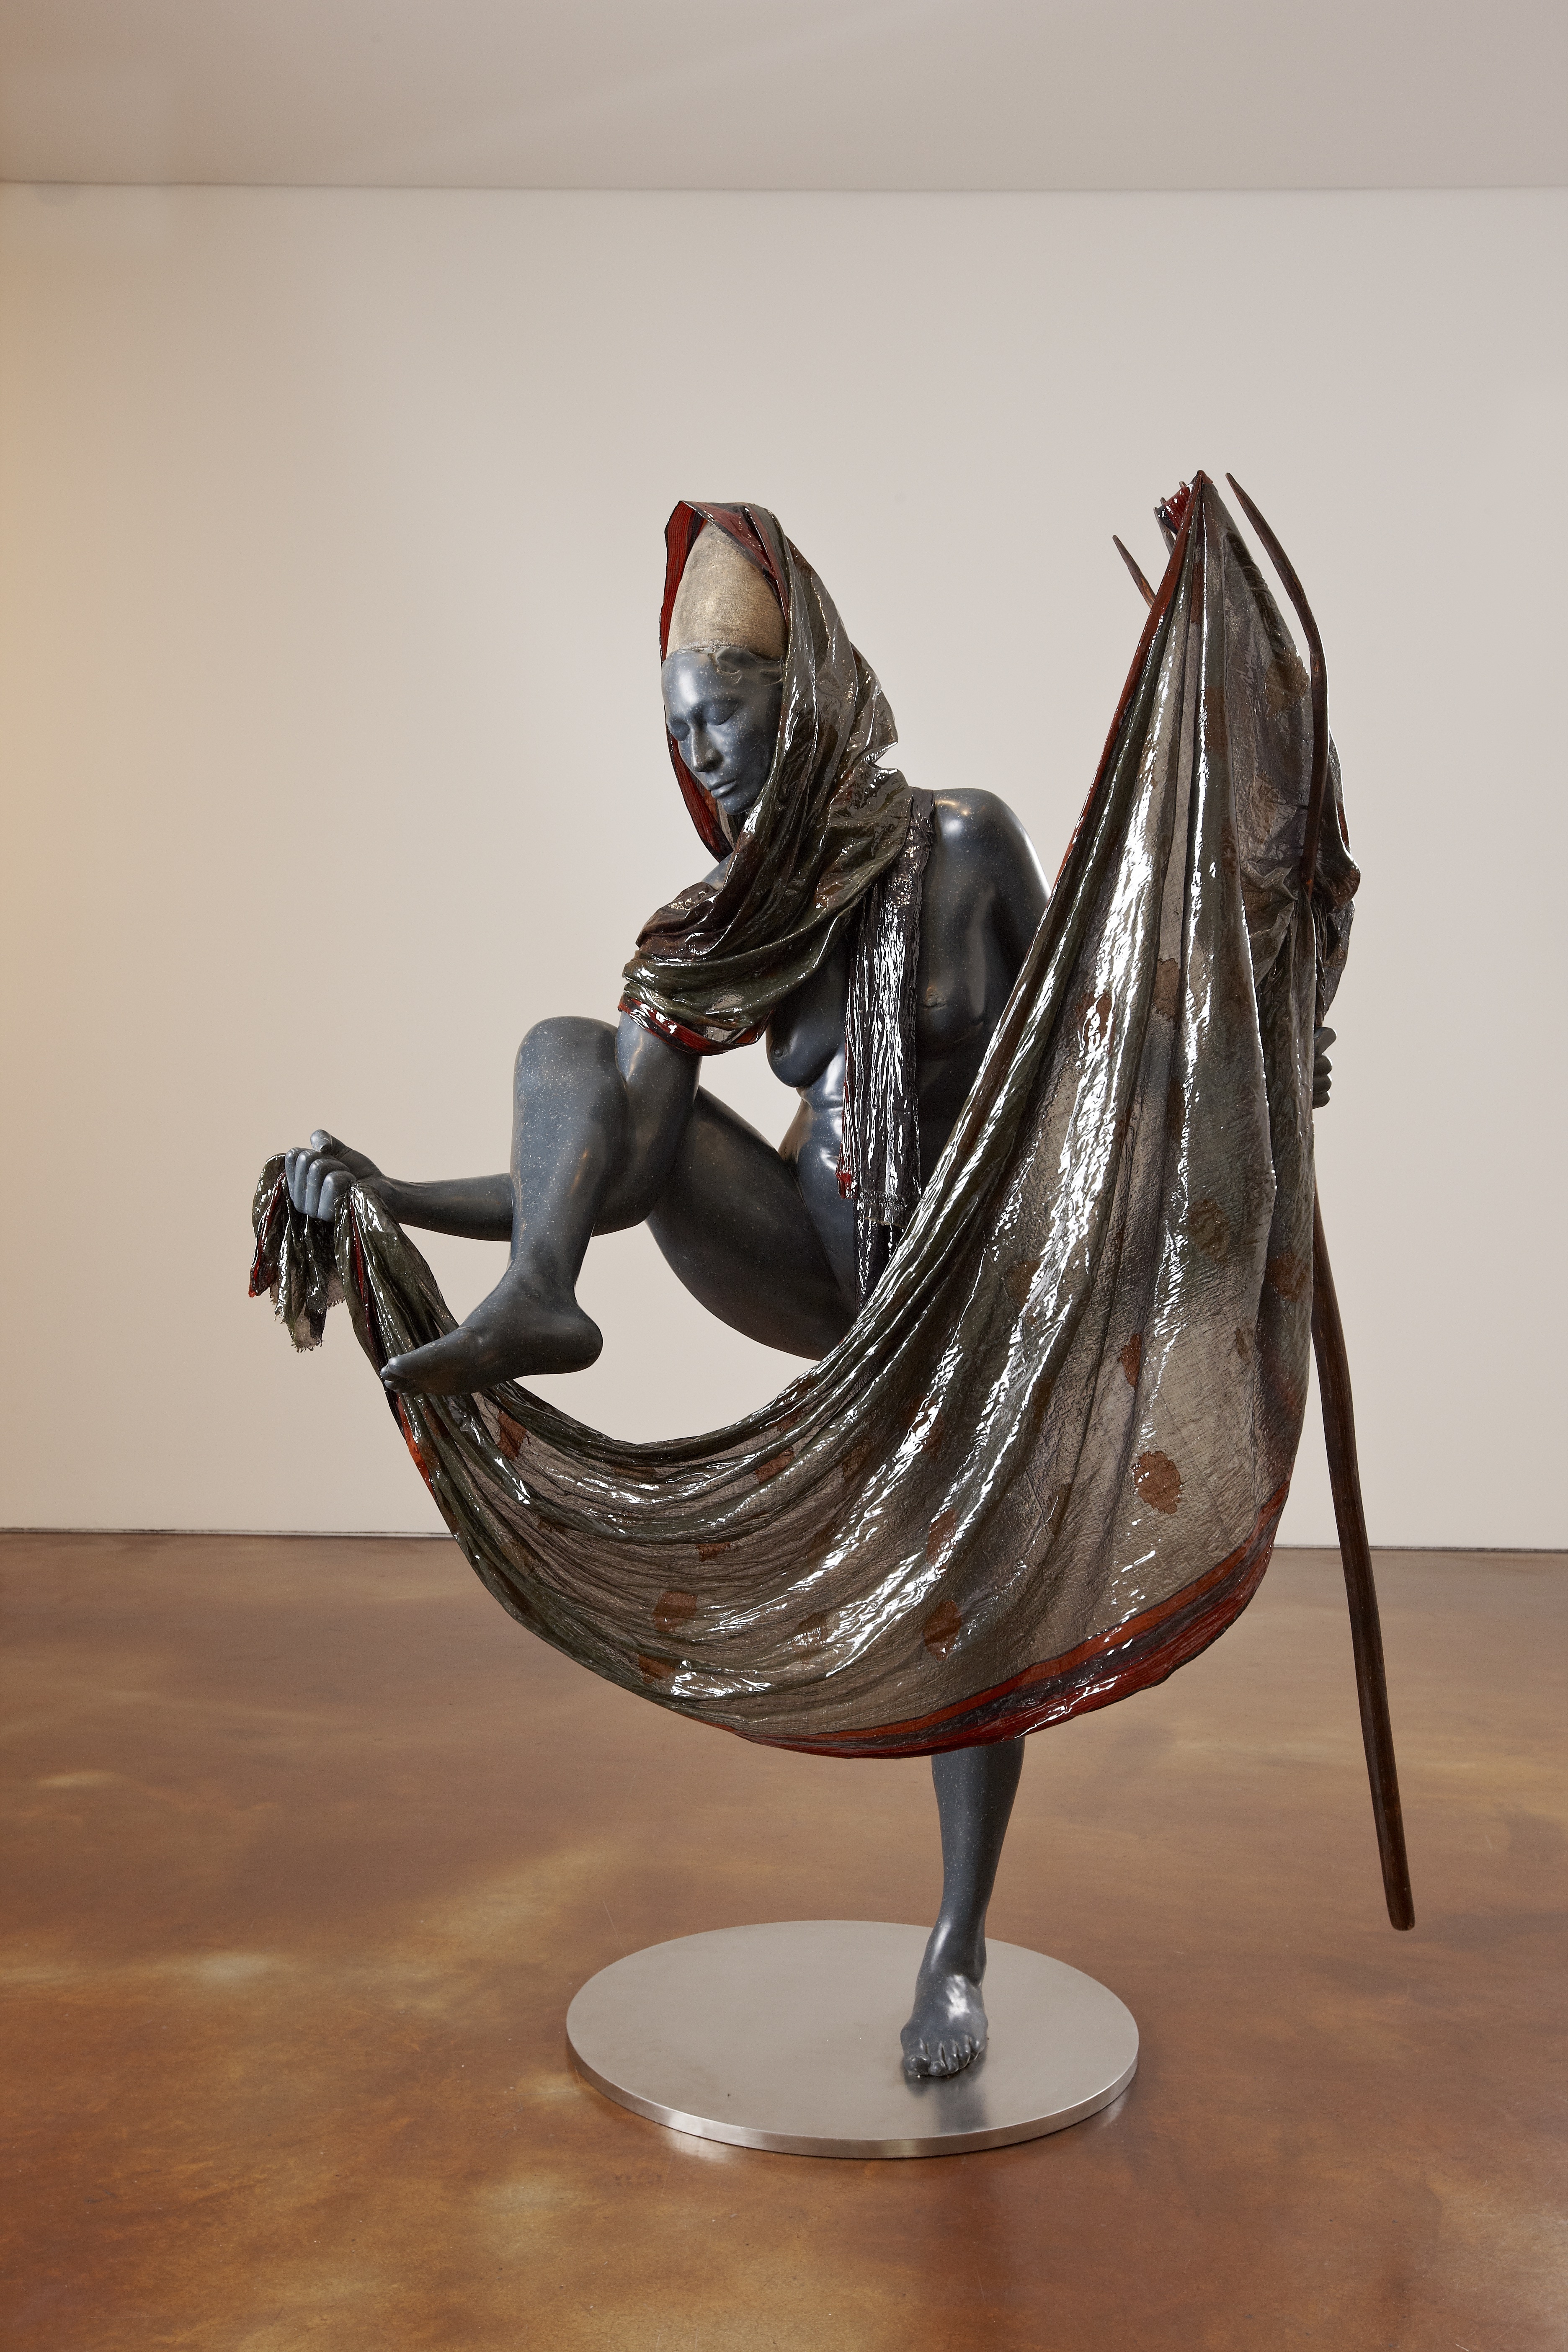 Sculpture of a woman poised on one leg, the other in the air, draped in a silver sari.